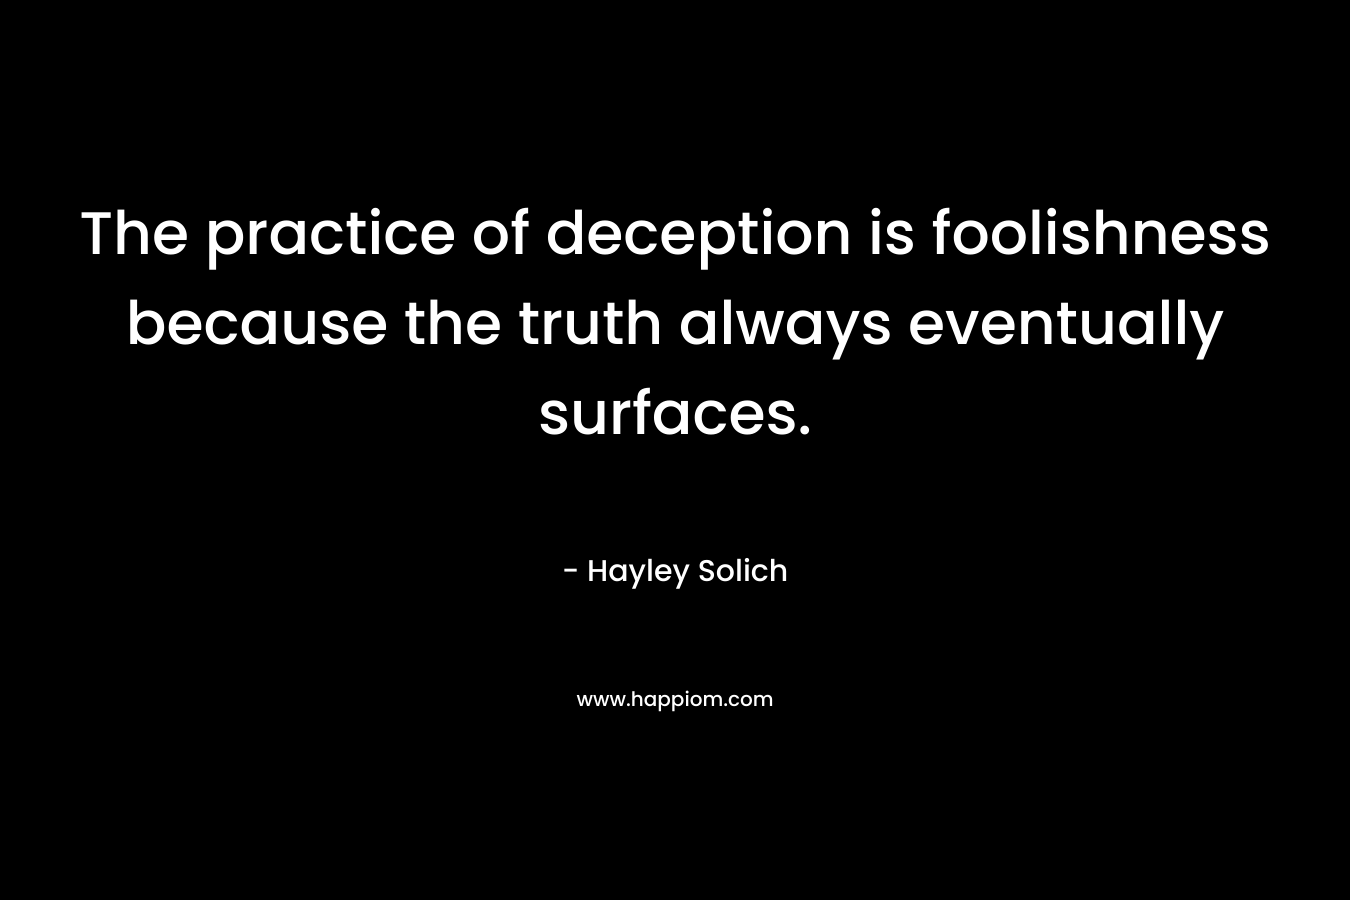 The practice of deception is foolishness because the truth always eventually surfaces. – Hayley Solich